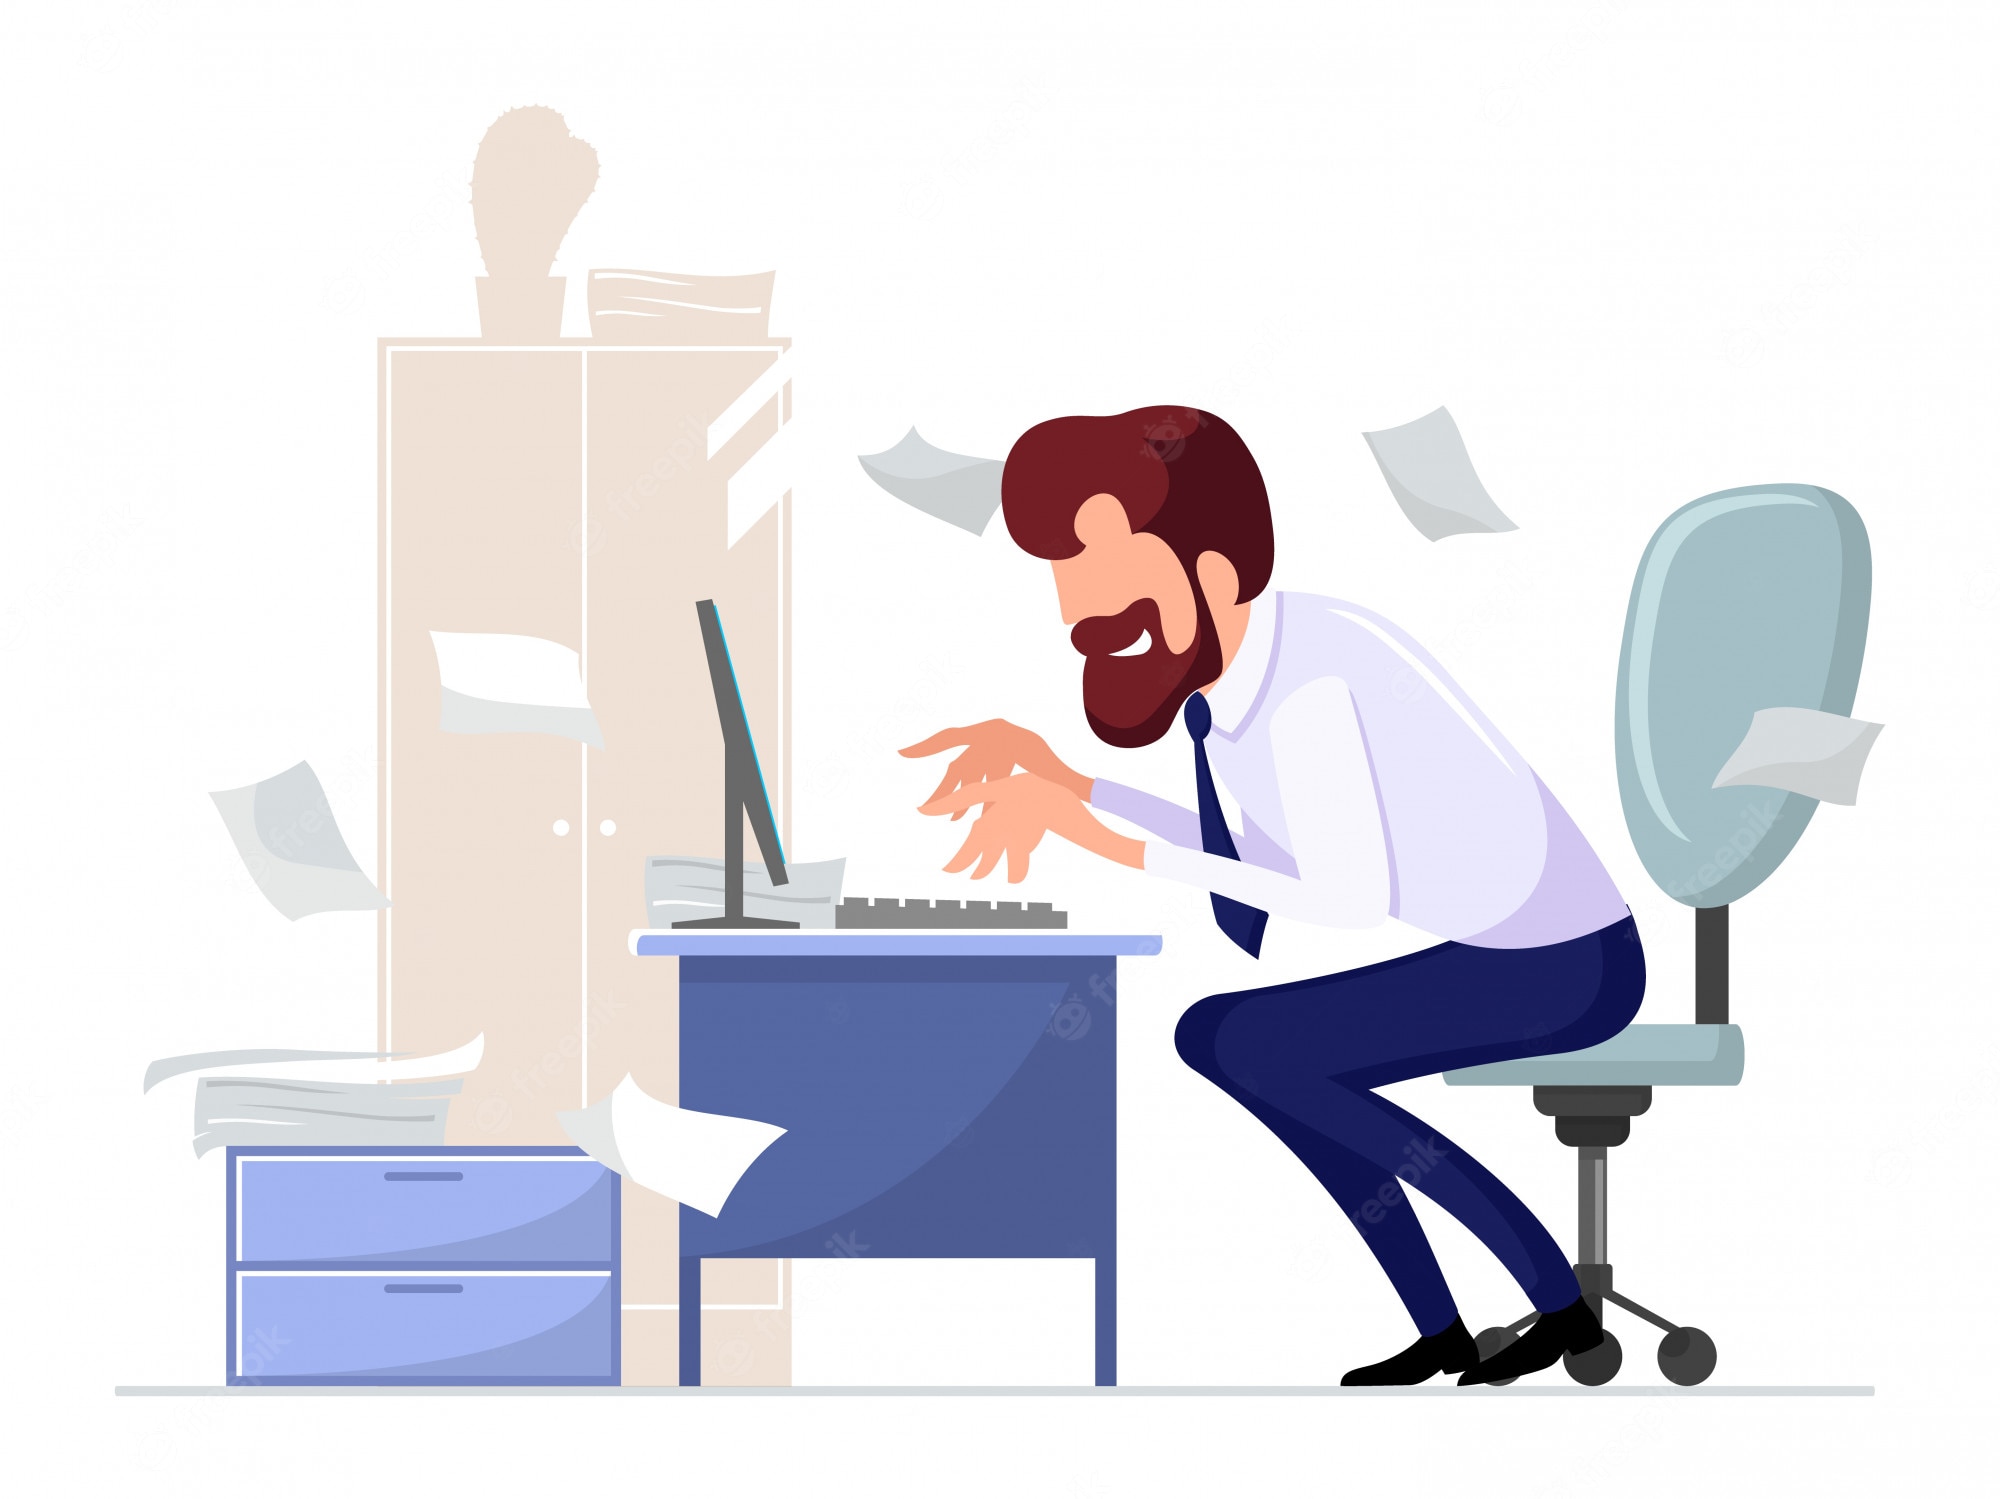 Premium Vector. Bearded office worker, employee sitting on chair at computer desk, working enthusiastically at background of cupboard, plant, scattered papers. hardworking man typing. cartoon illustration